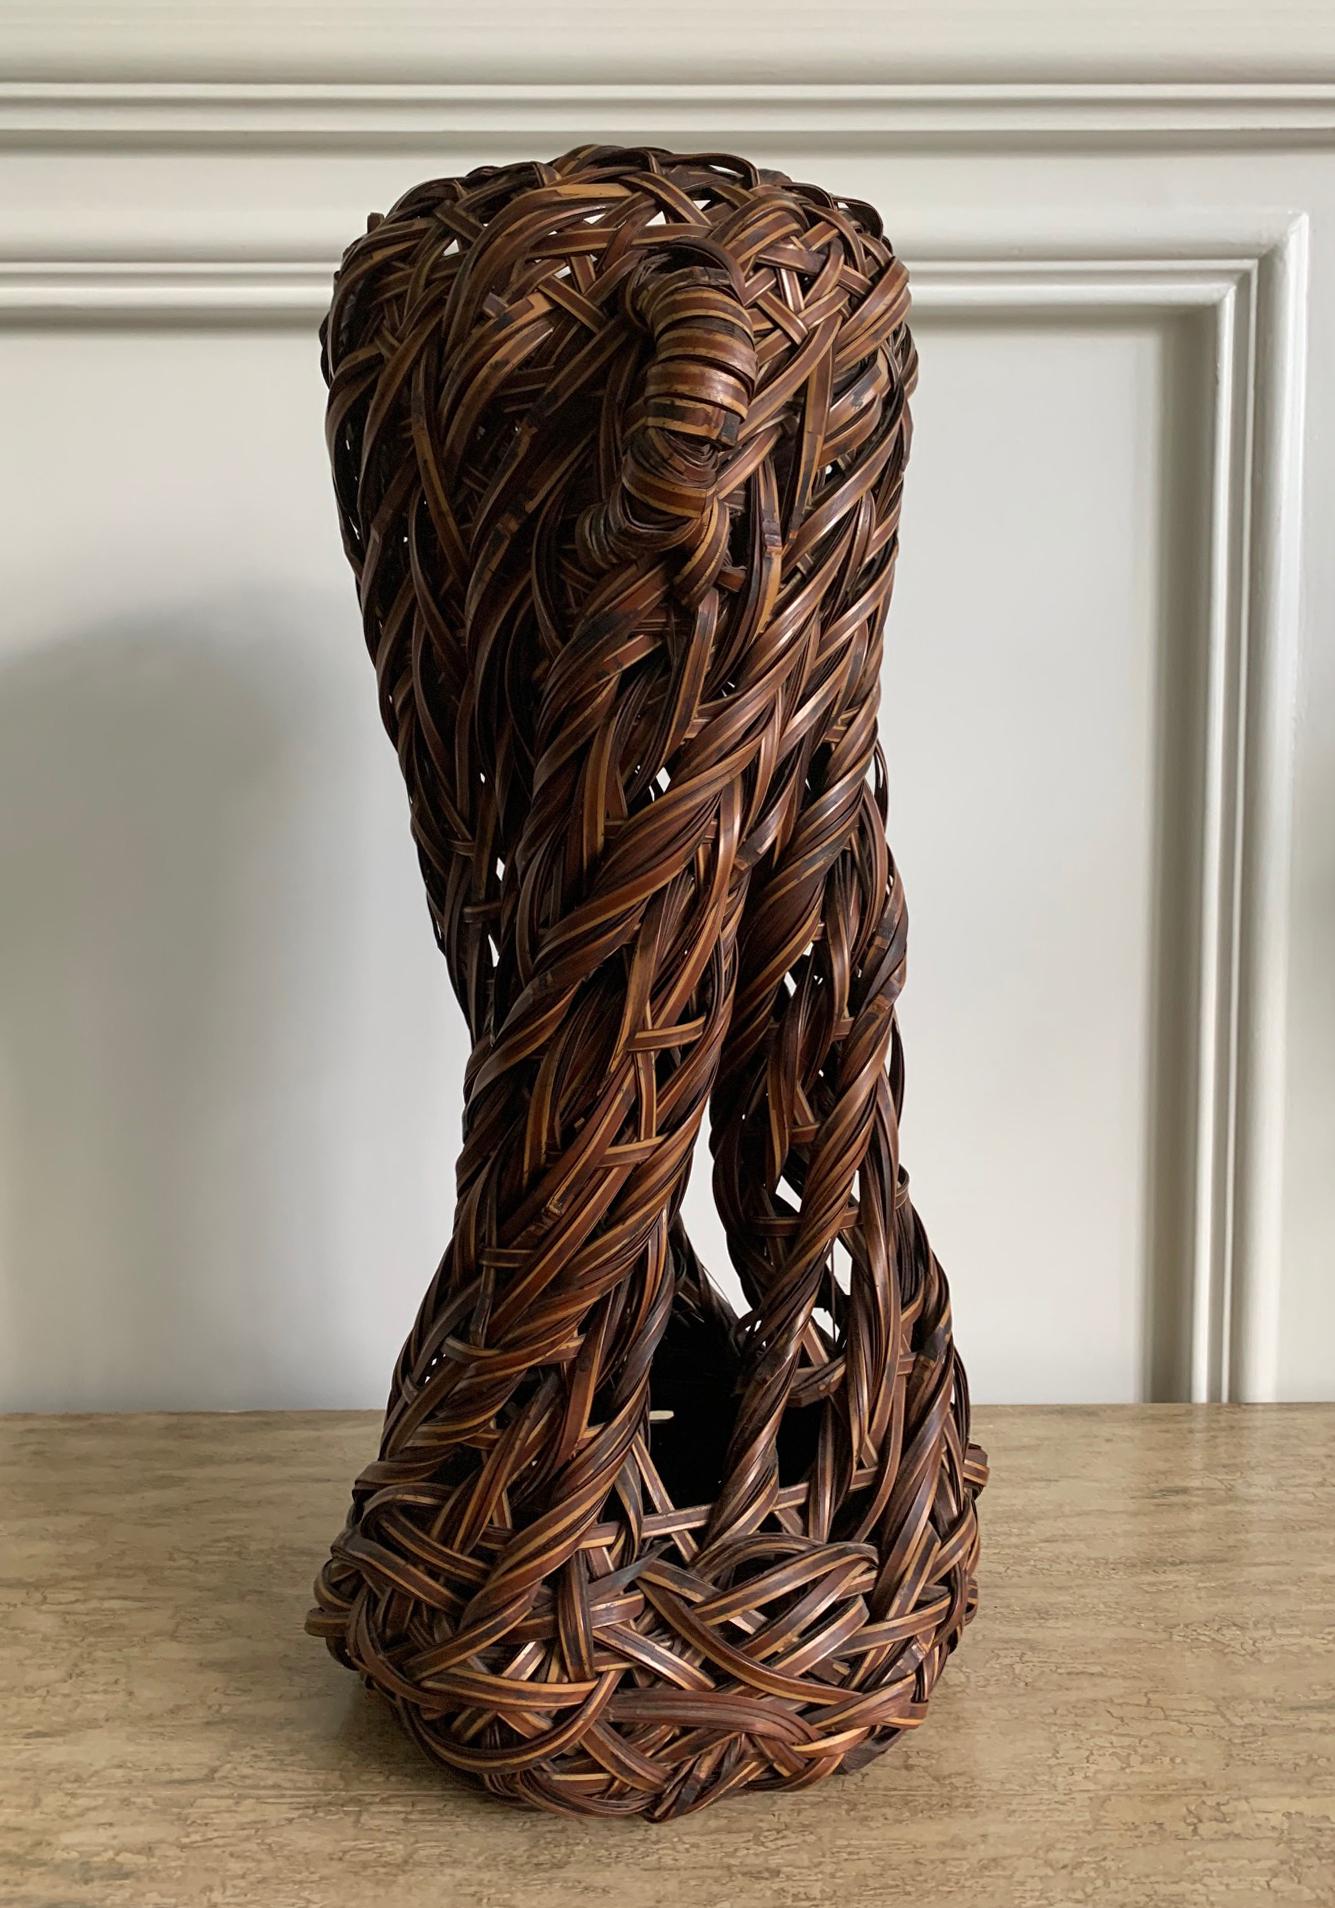 A visually arresting Japanese bamboo Ikebana basket that is more a sculpture than a vase. The open design was largely achieved through an expert hand and almost exclusively the bundled weaving technique. The flattened bamboo strips were manipulated